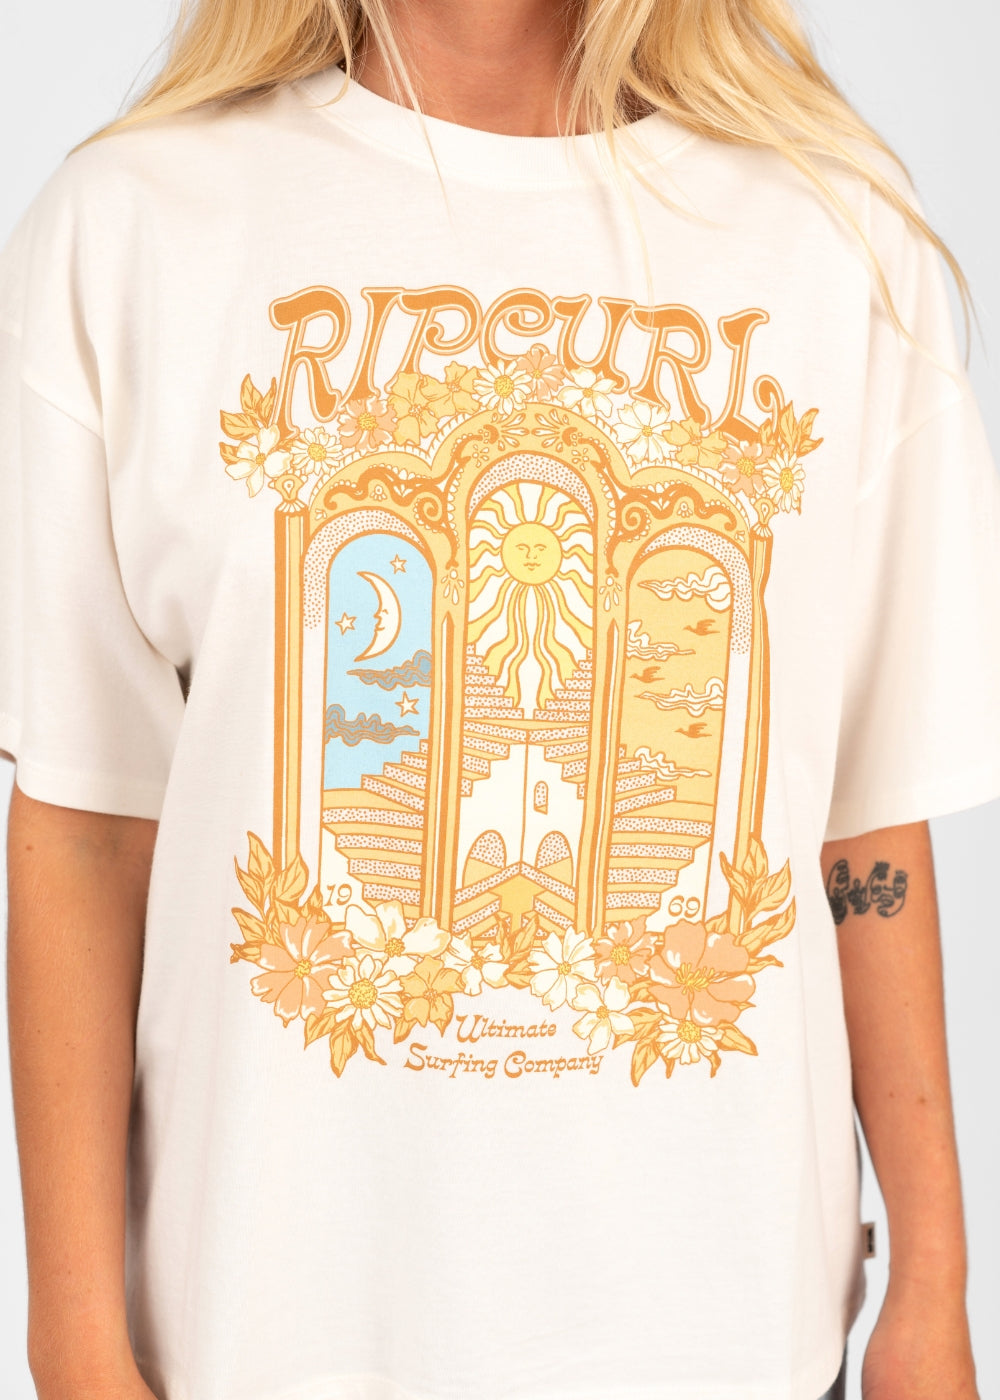 Tropical Tour Heritage Tee by Rip Curl